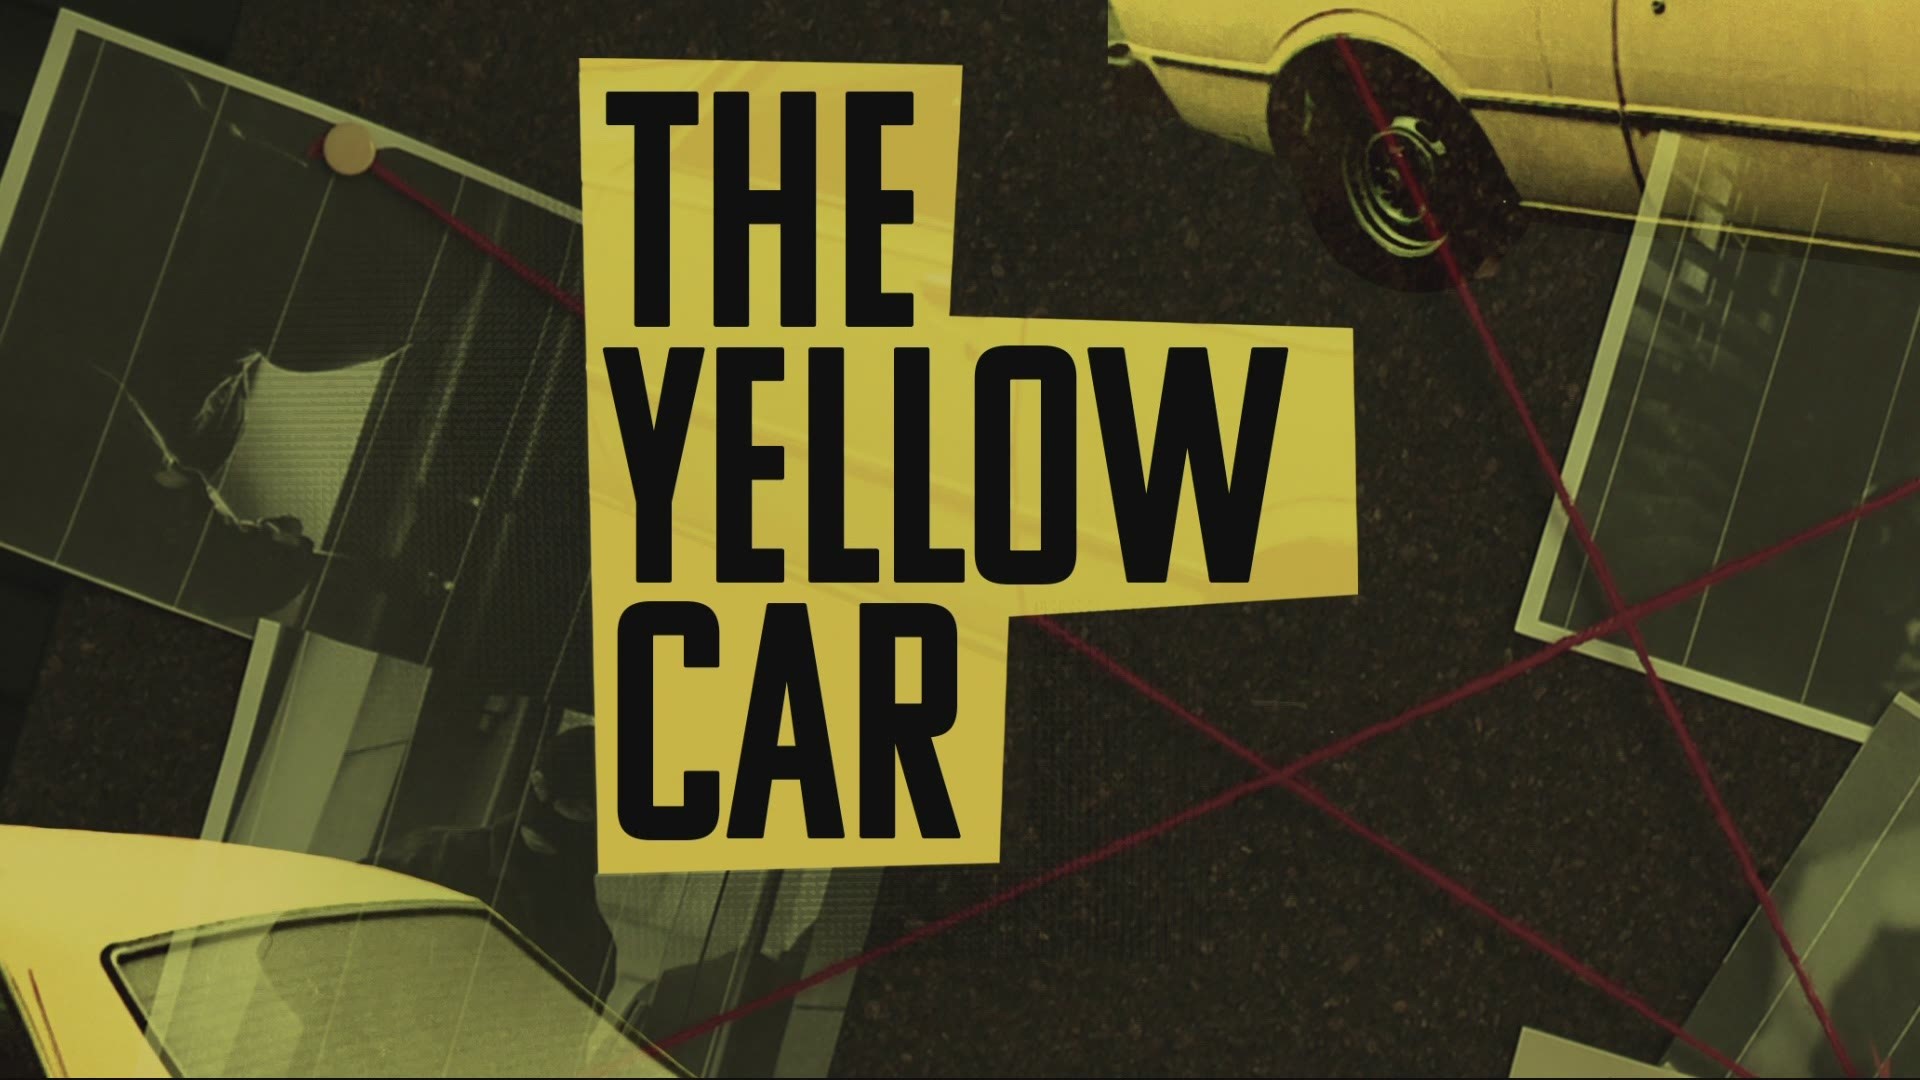 KGW is launching a new, true-crime podcast called "The Yellow Car." We talked to Ashley Korslien abou the podcast. She's the host and producer.